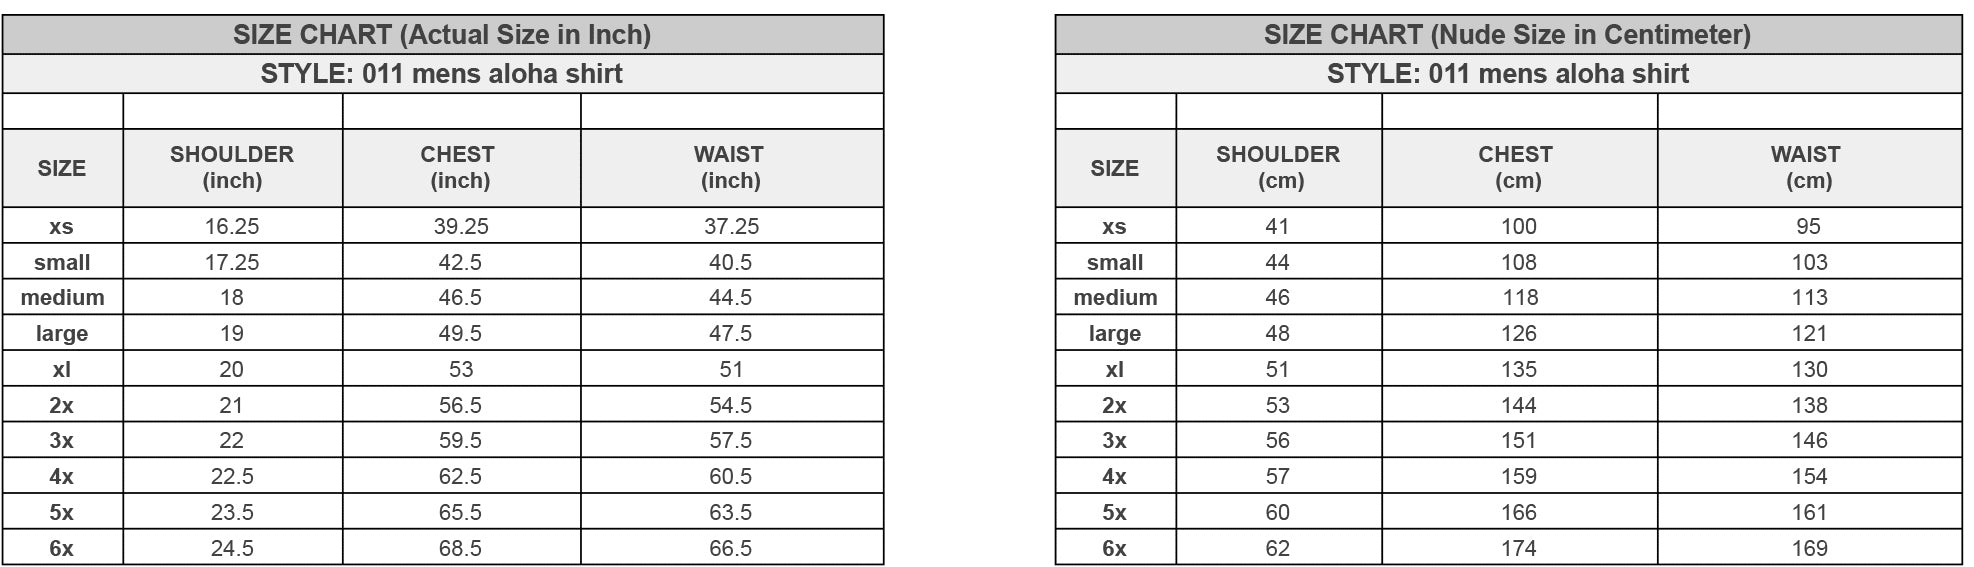 casual shirt size